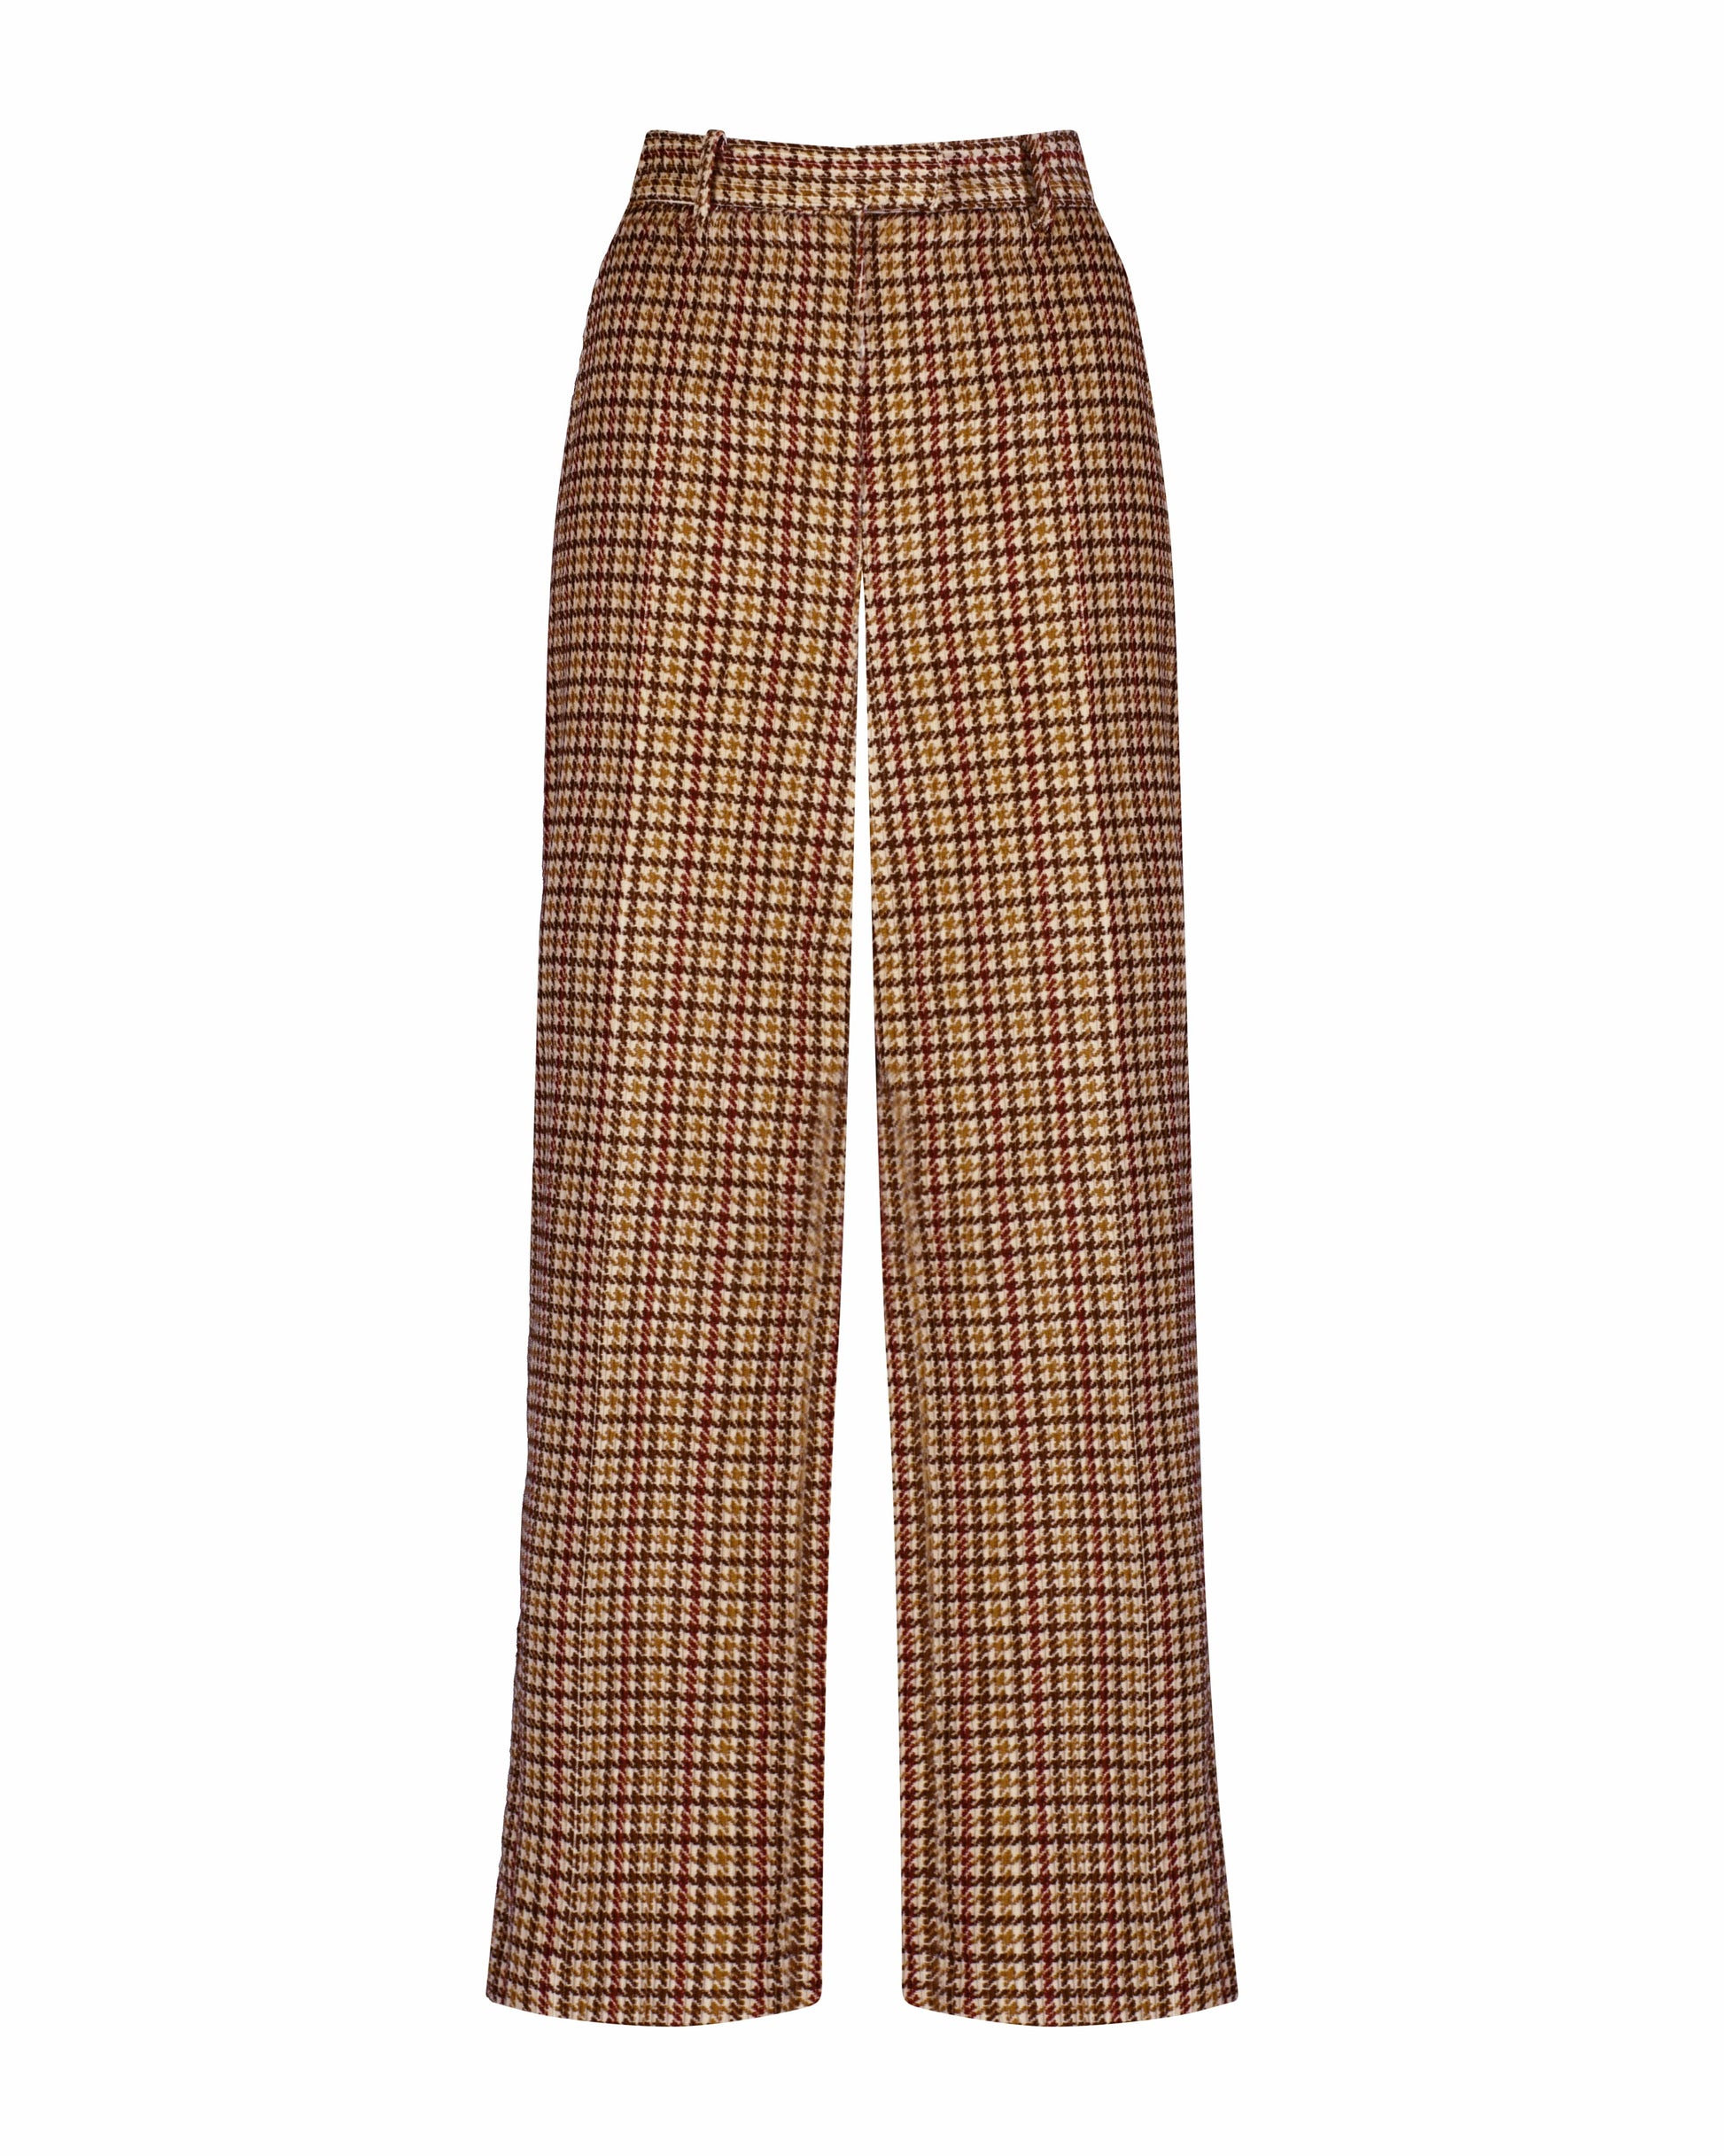 Piper Pant in in Italian Houndstooth Corduroy Pants CHRISTINE ALCALAY   